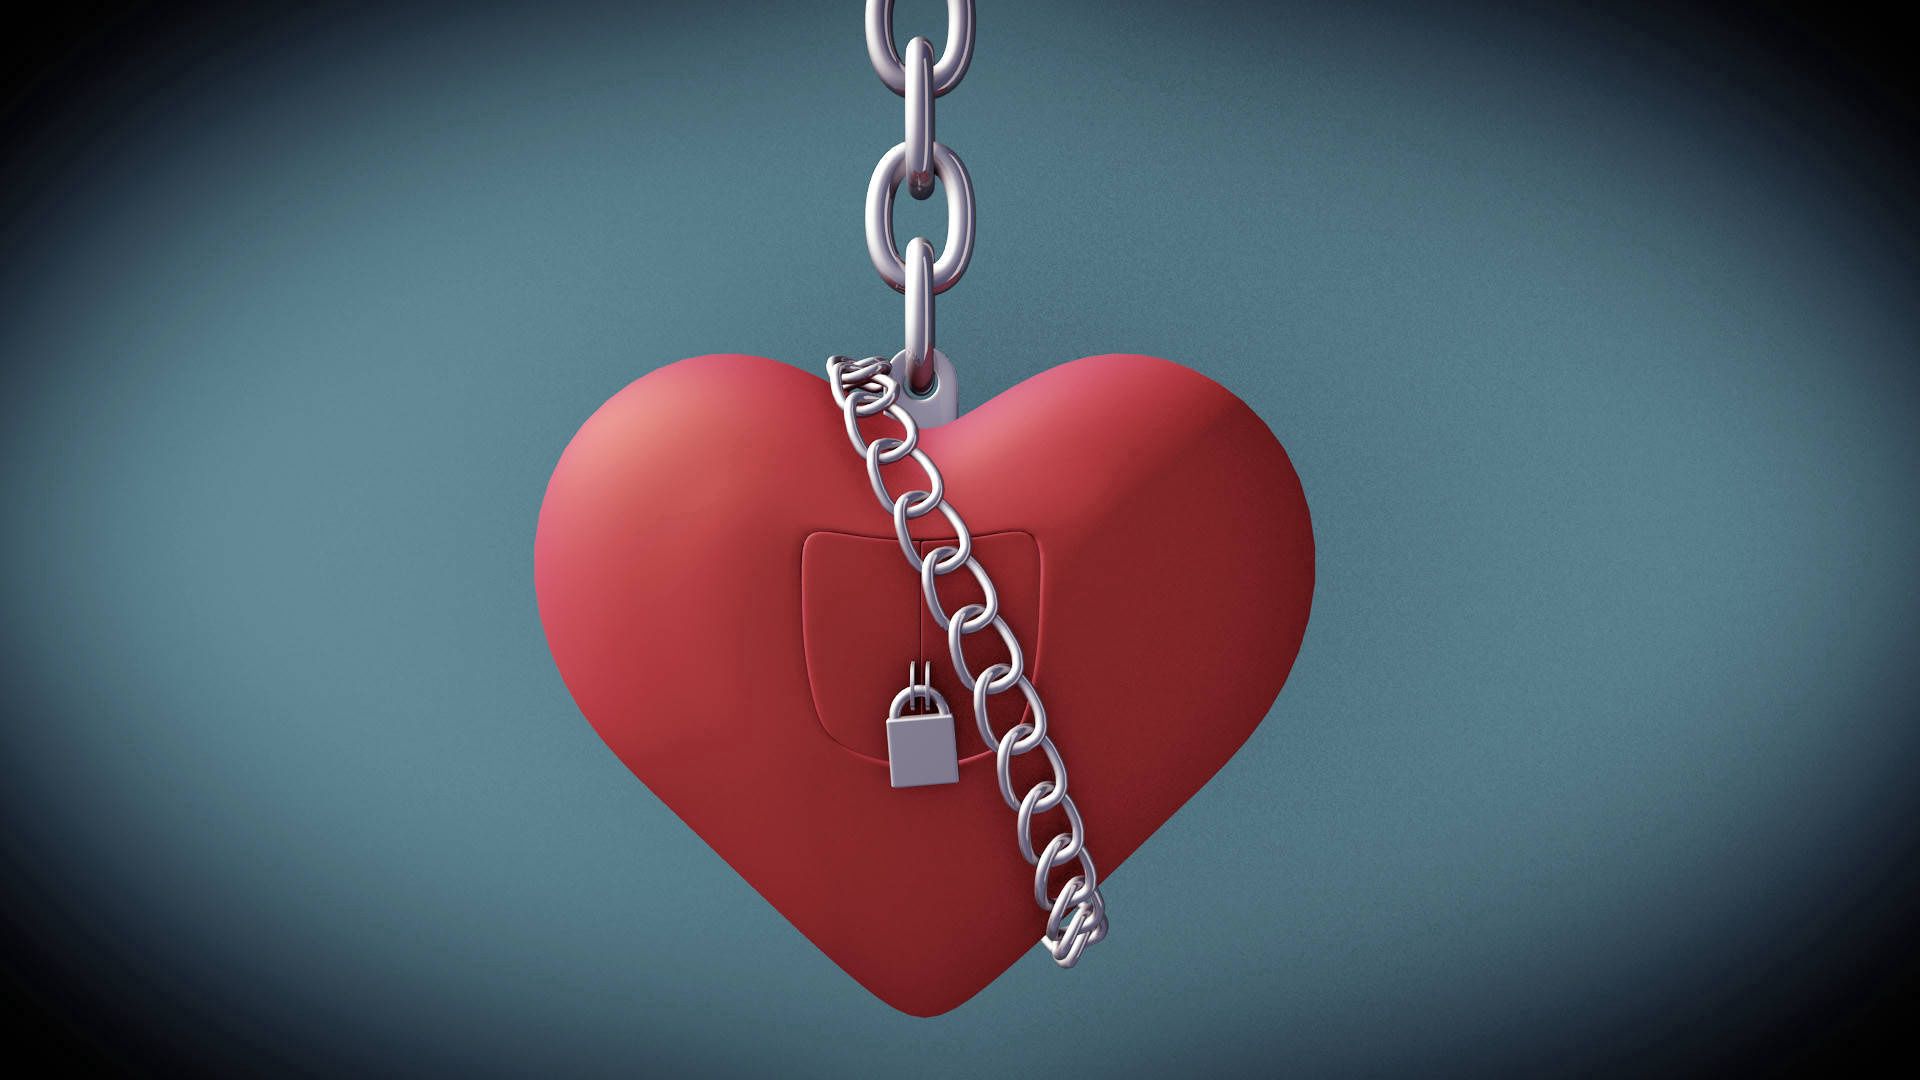 wallpapers love, holidays, lock, heart, chain, valentine's day, st valentine's day